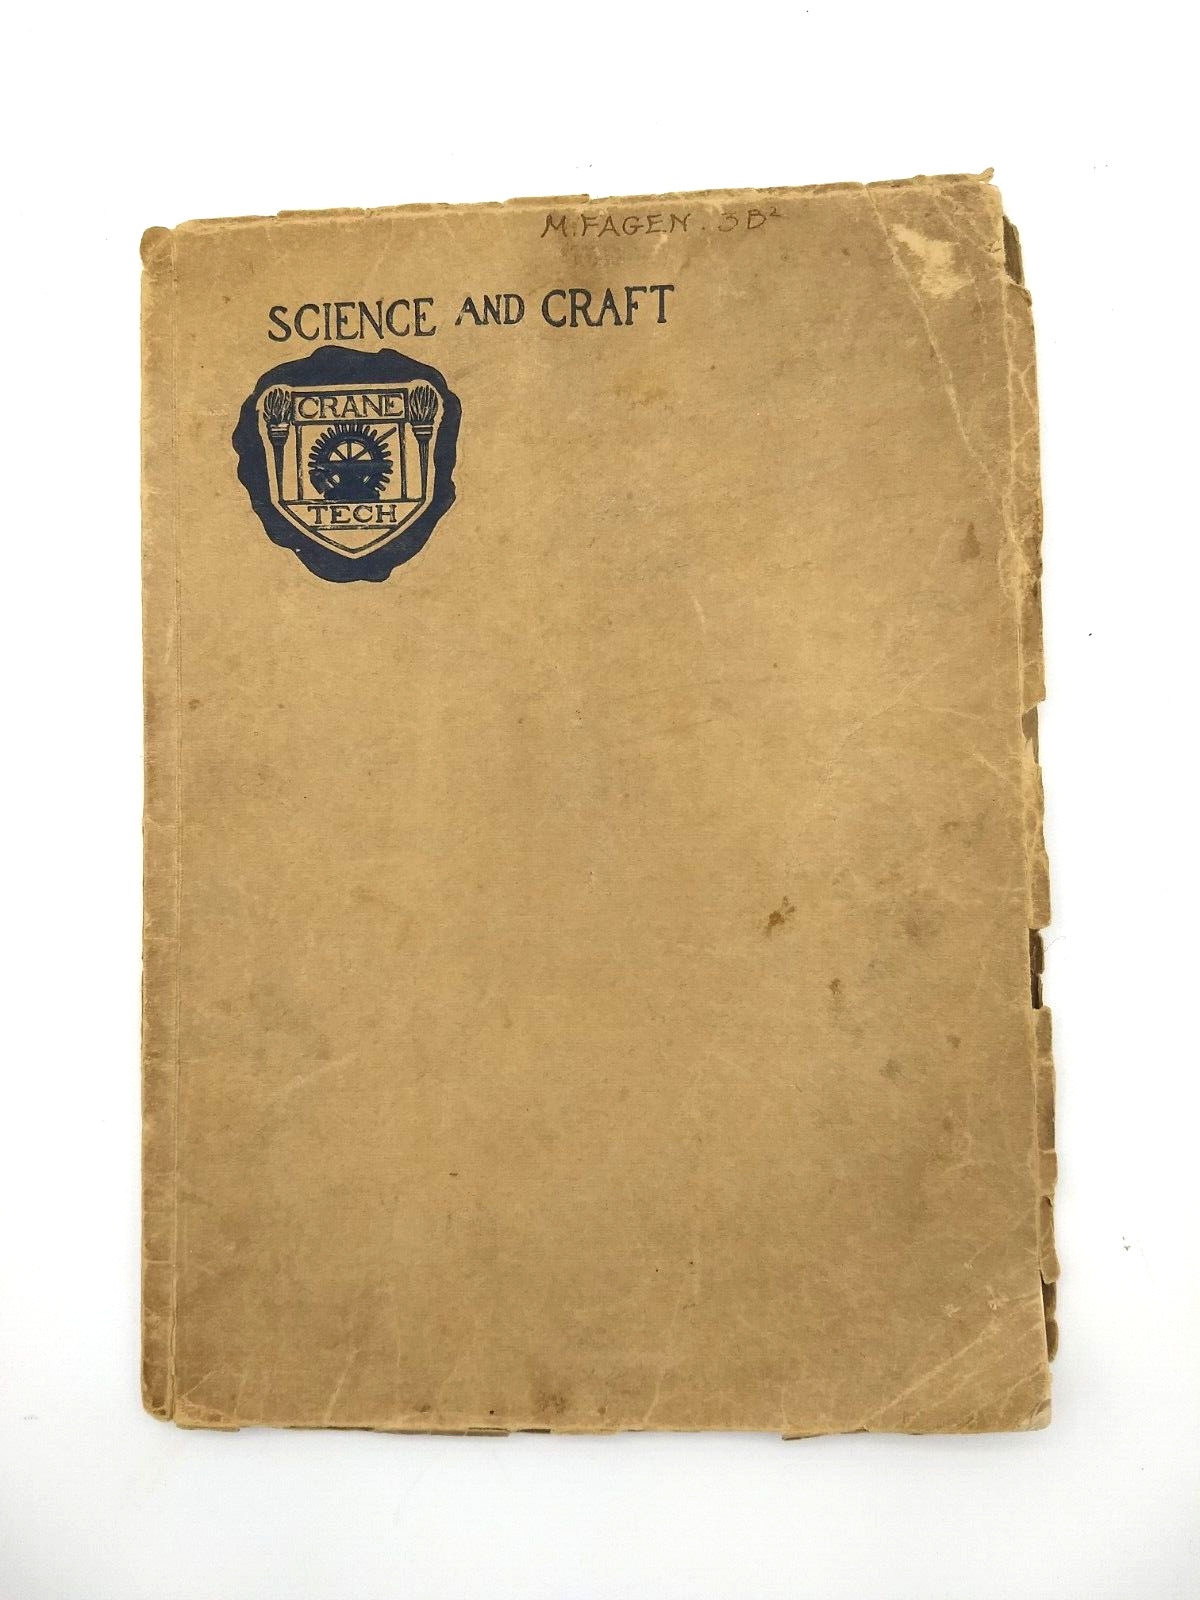 Crane Tech High School Yearbook, Science and Craft, Chicago, Class of 1918 1/2